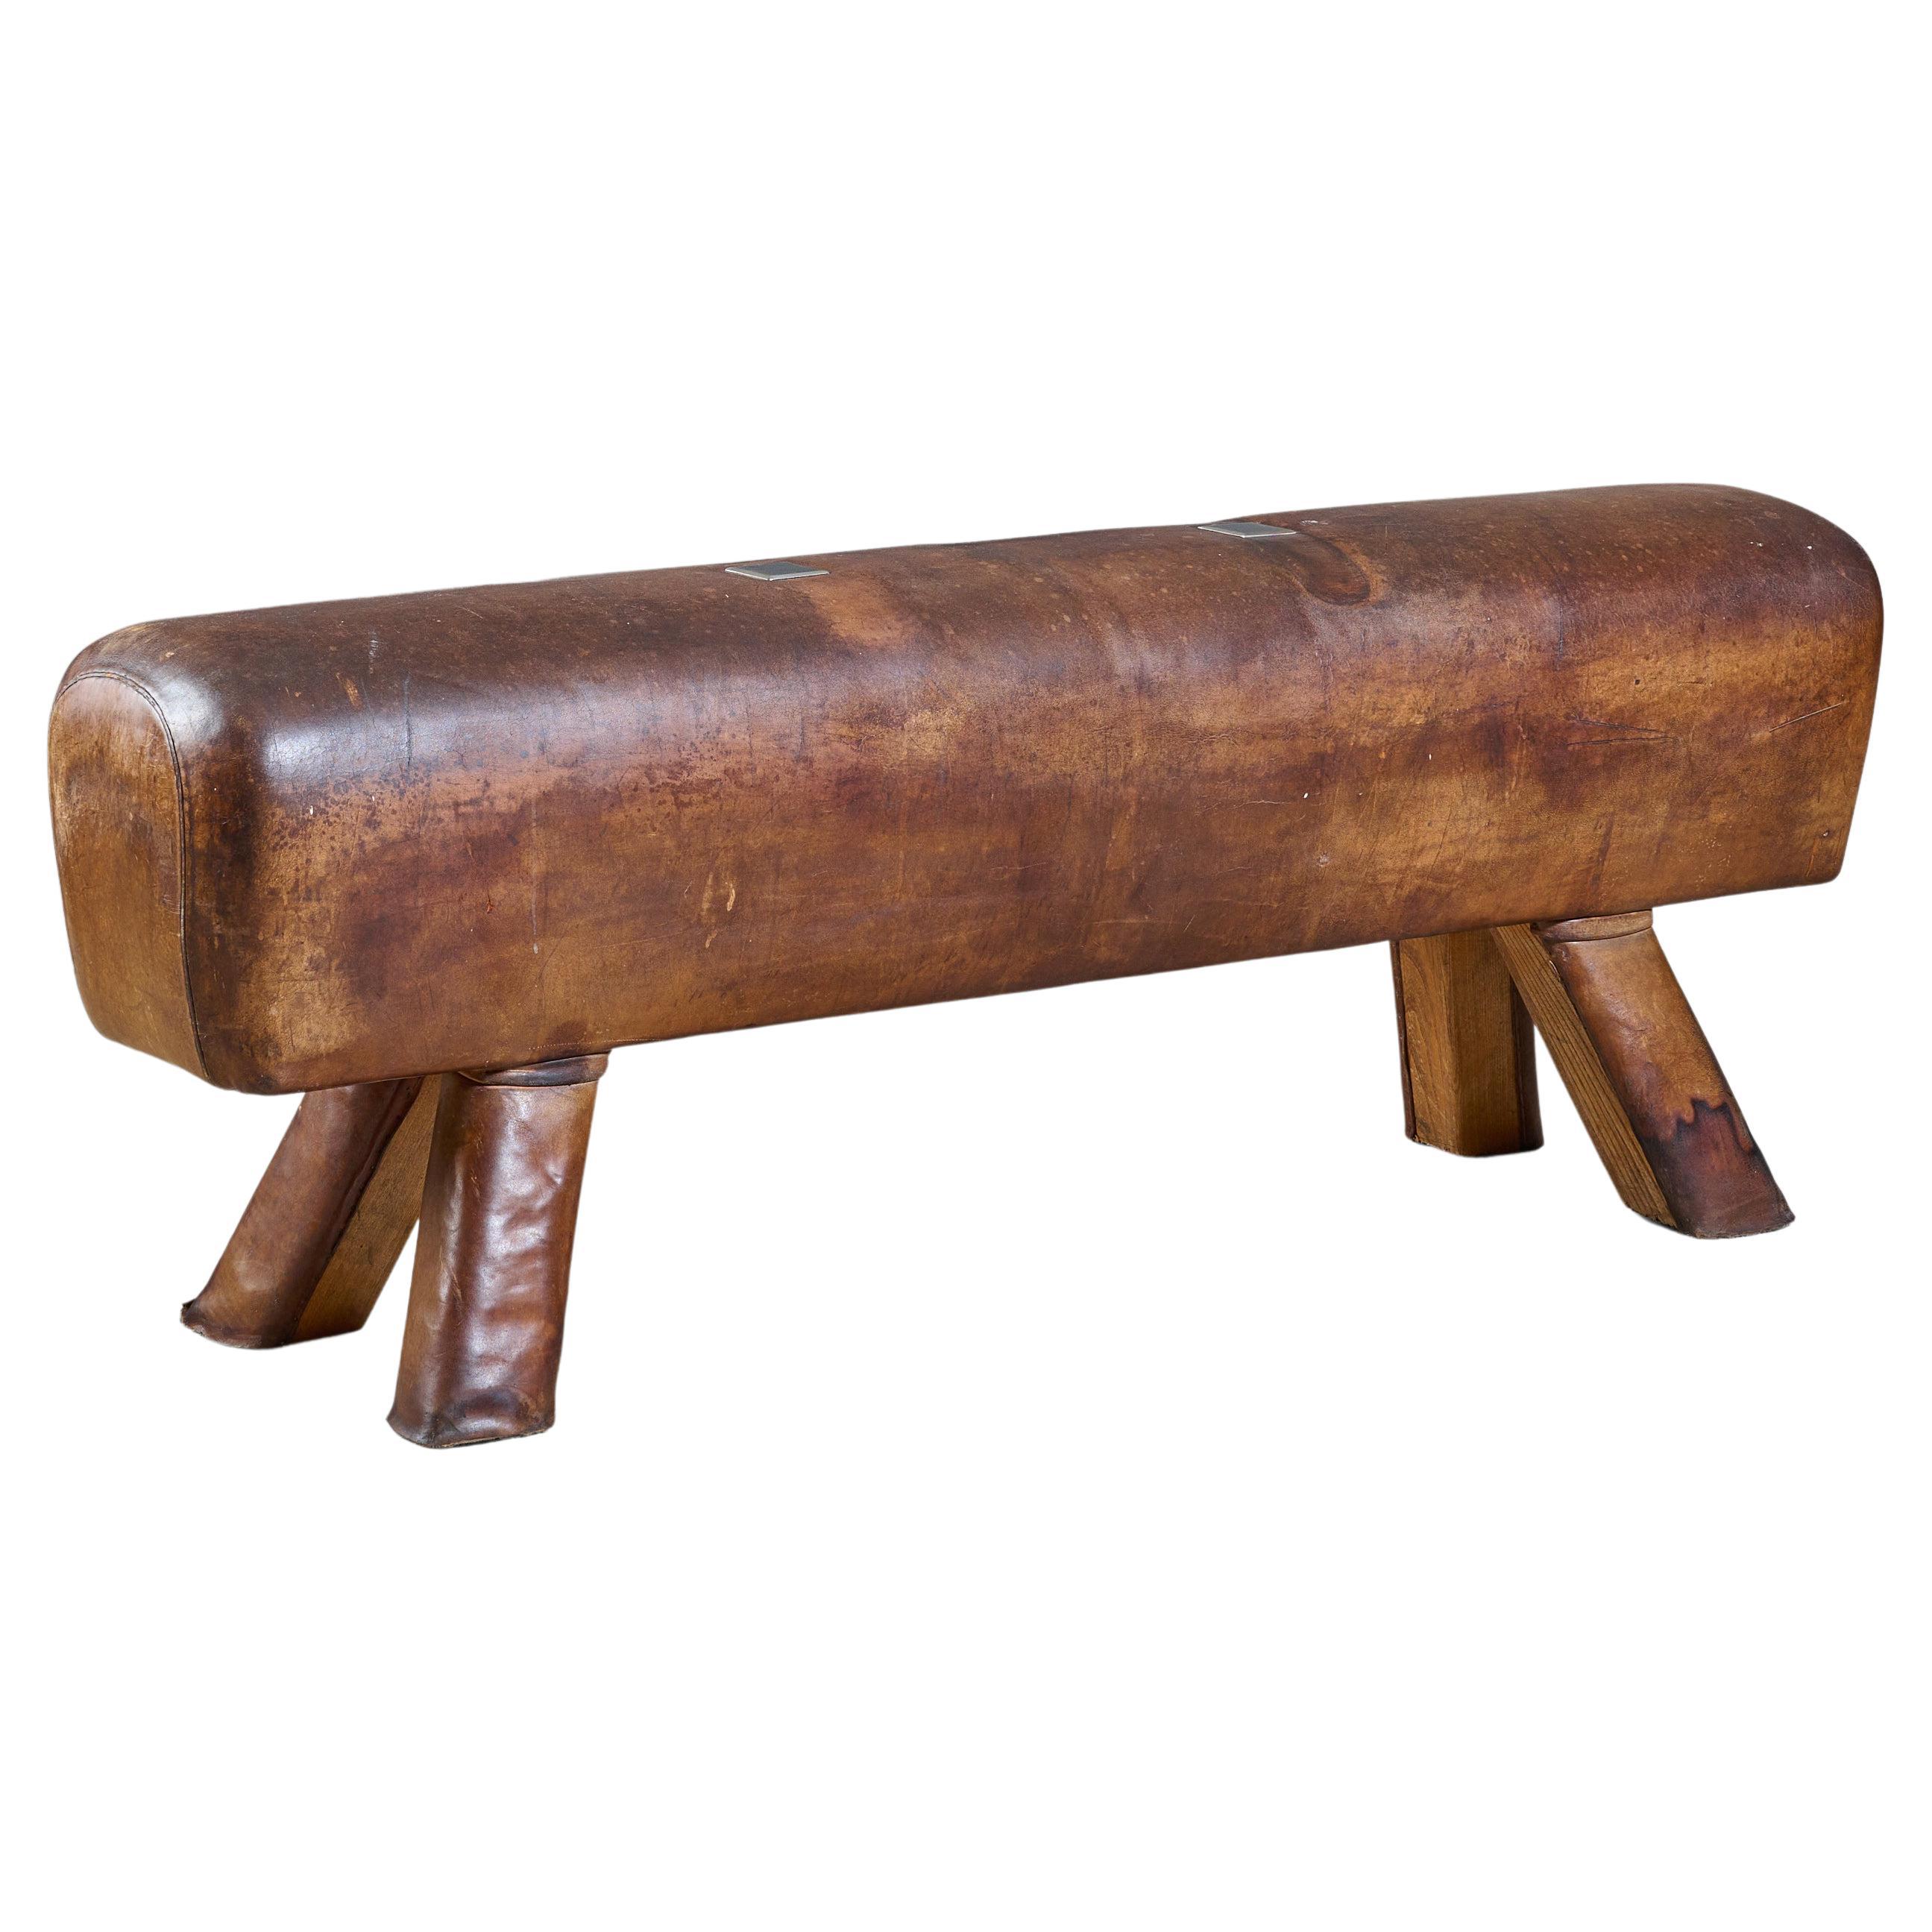 Vaulting Horse Bench For Sale